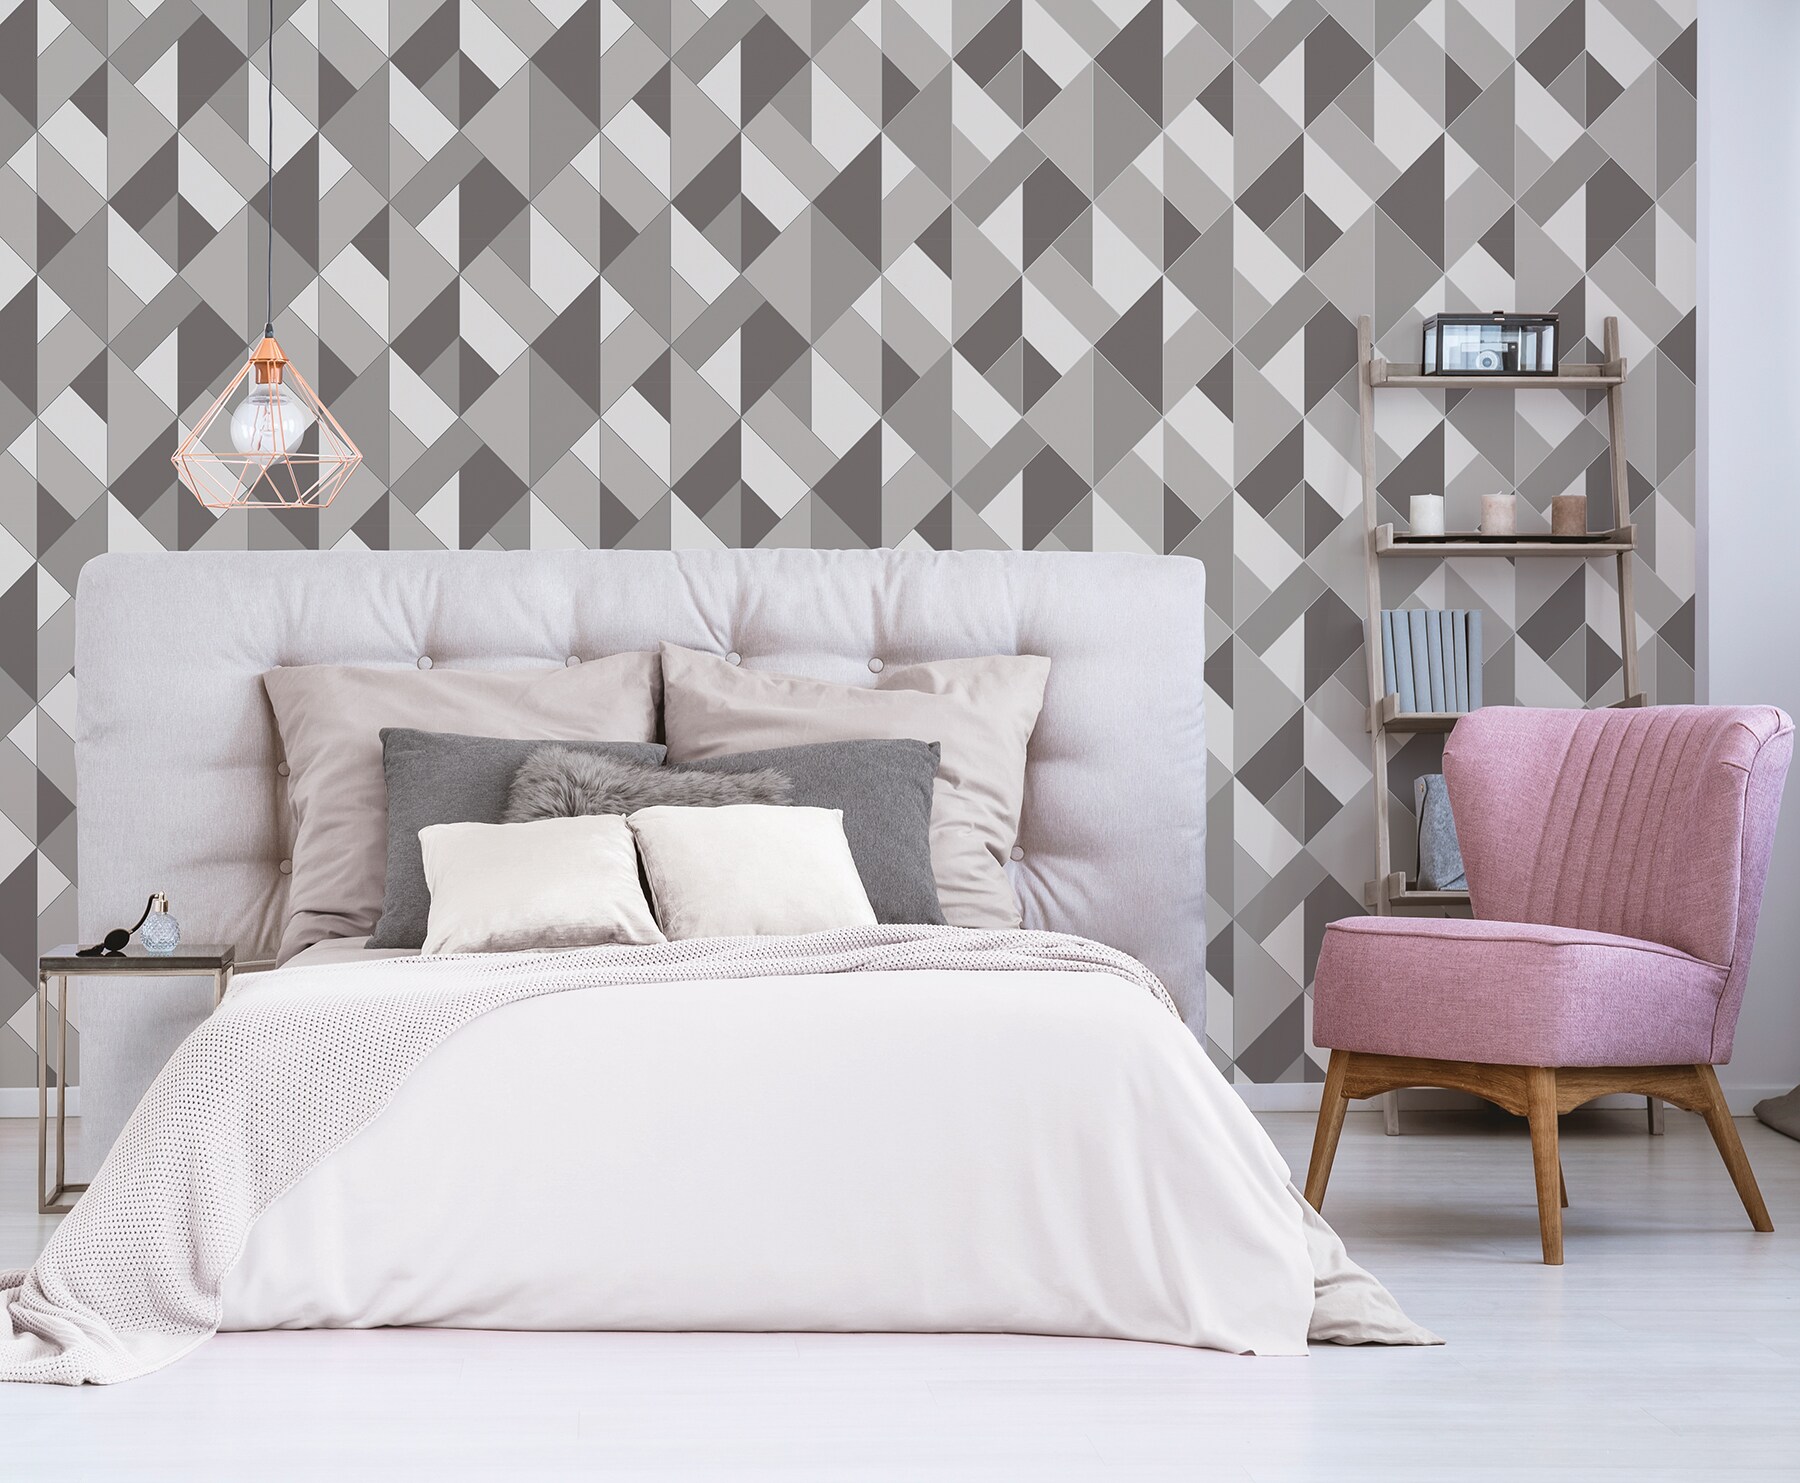 Brewster Urban Walls 56.4-sq ft Grey Non-woven Geometric Unpasted ...